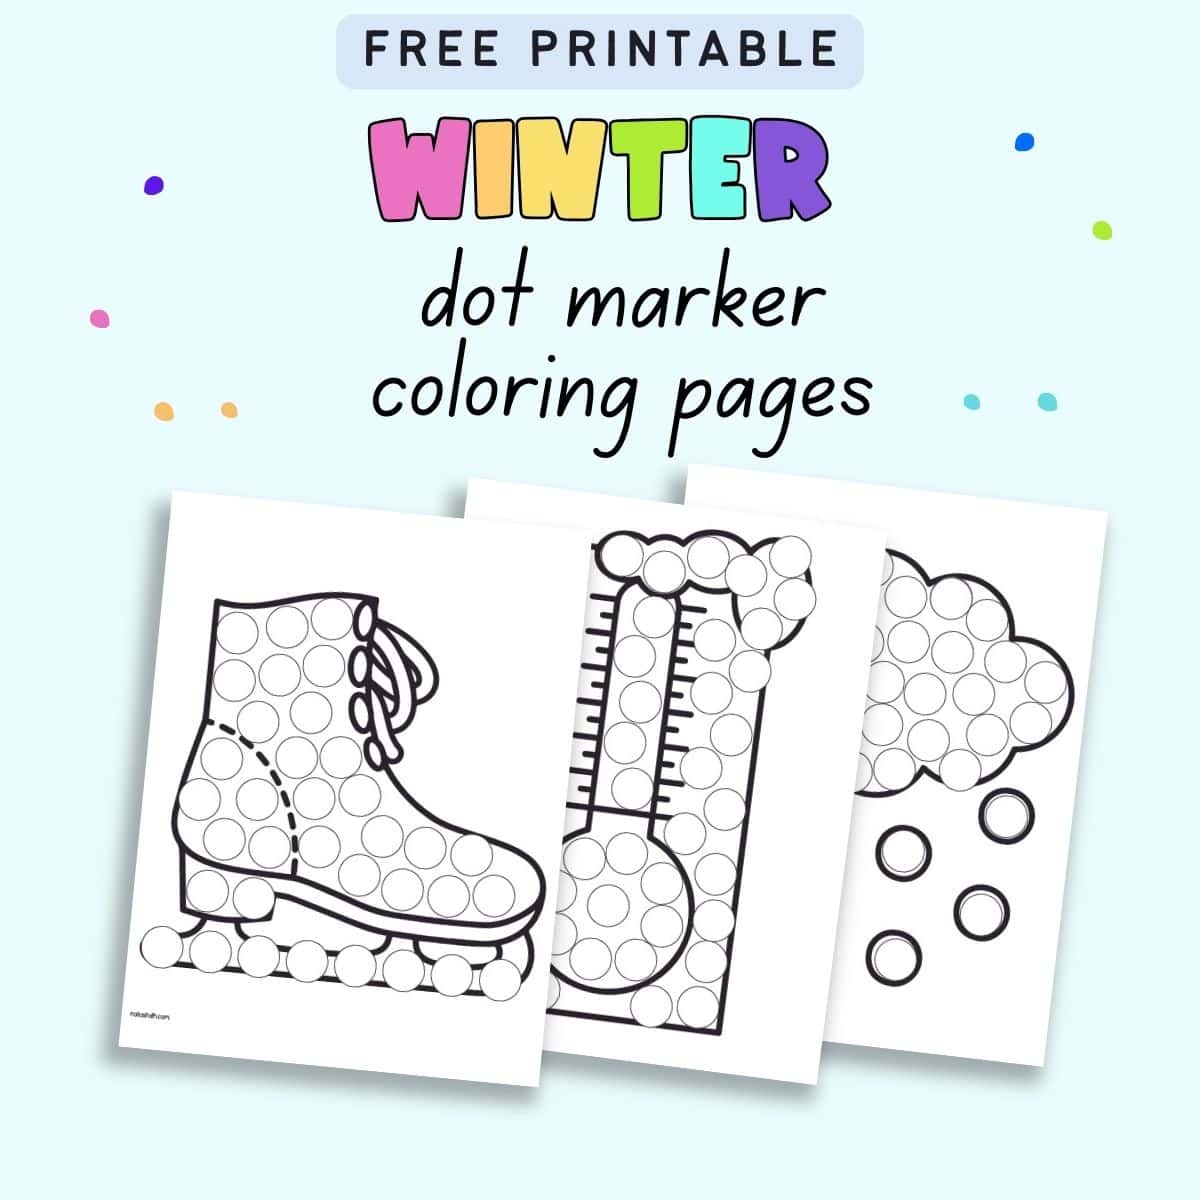 Text "free printable winter dot marker coloring pages" with a preview of there pages" one with a thermometer, another with a skate, and the third with a snow cloud